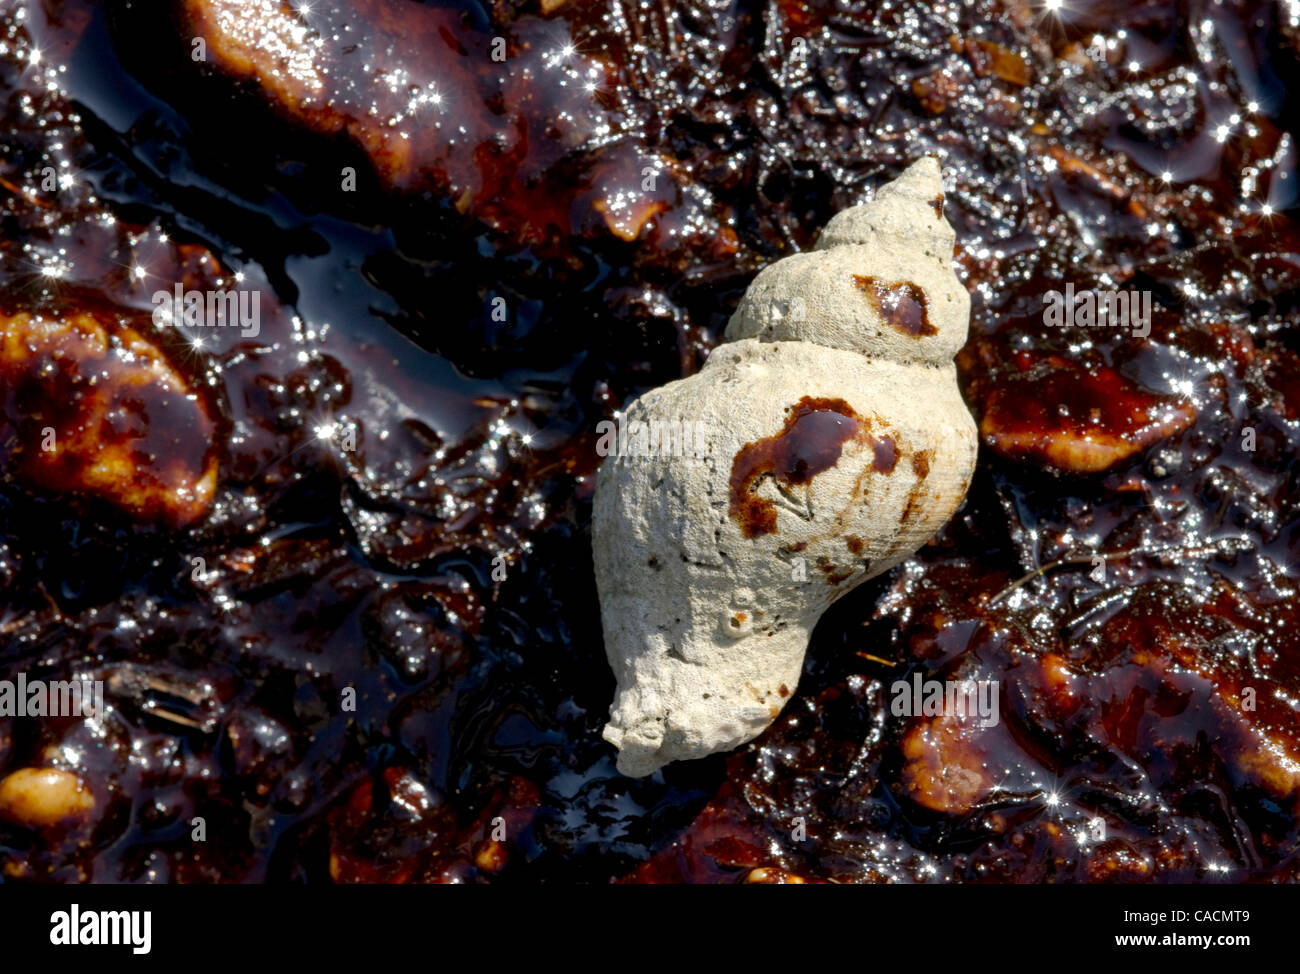 June 11, 2010 - Grand Isle, Louisiana, U.S - A shell sits on oil stained rocks from the Deepwater Horizon oil spill in Grand Isle. Oil from the massive spill continues to impact the Gulf of Mexico. (Credit Image: © Robin Loznak/ZUMApress.com) Stock Photo